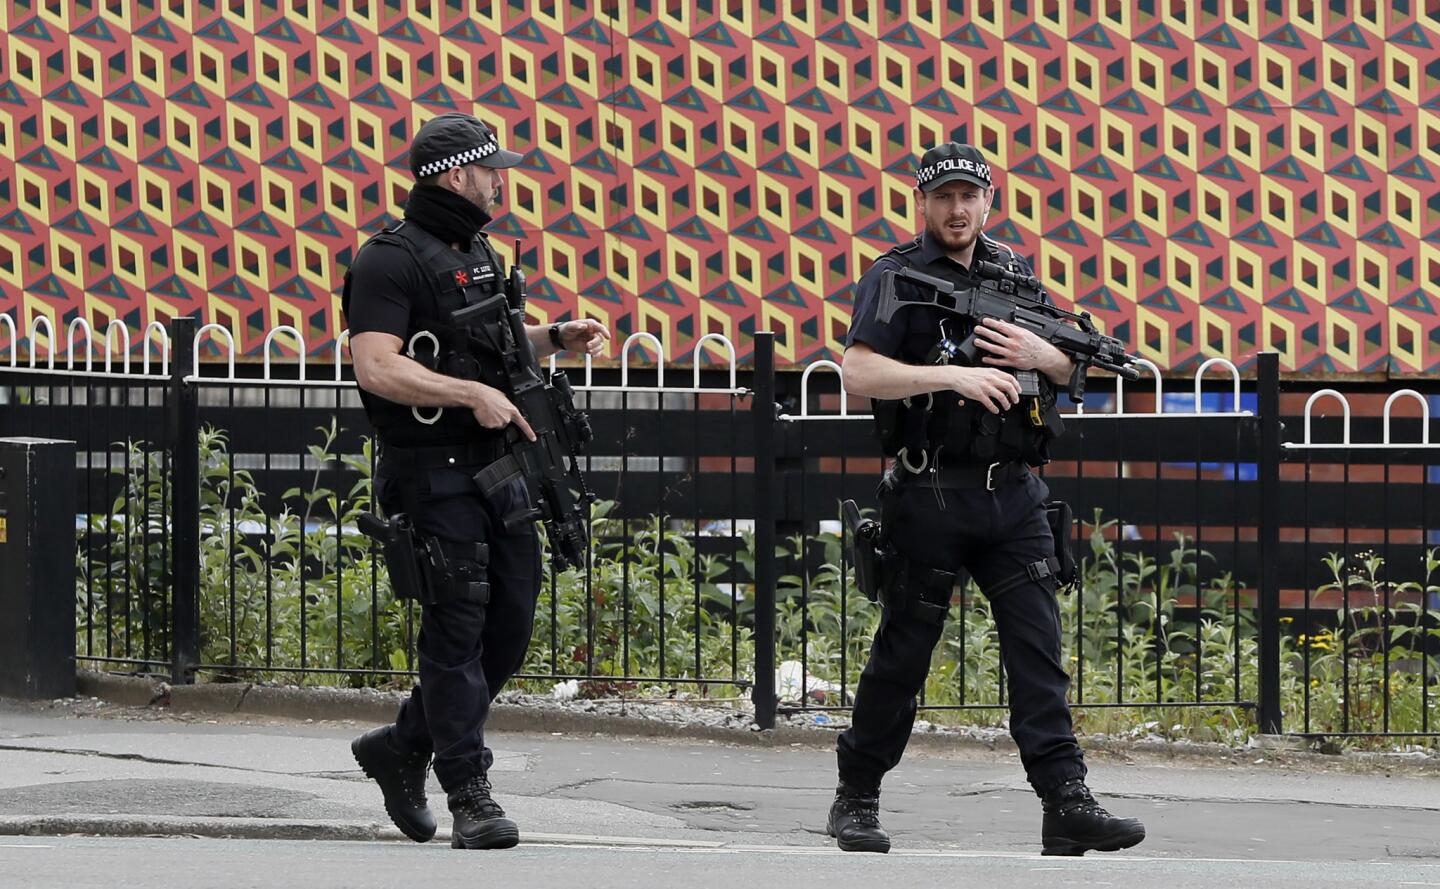 Police patrol May 24, 2017, near Victoria Station in Manchester, England. Armed troops were at vital locations after the official threat level was raised to its highest point following a suicide bombing that killed 22 people.